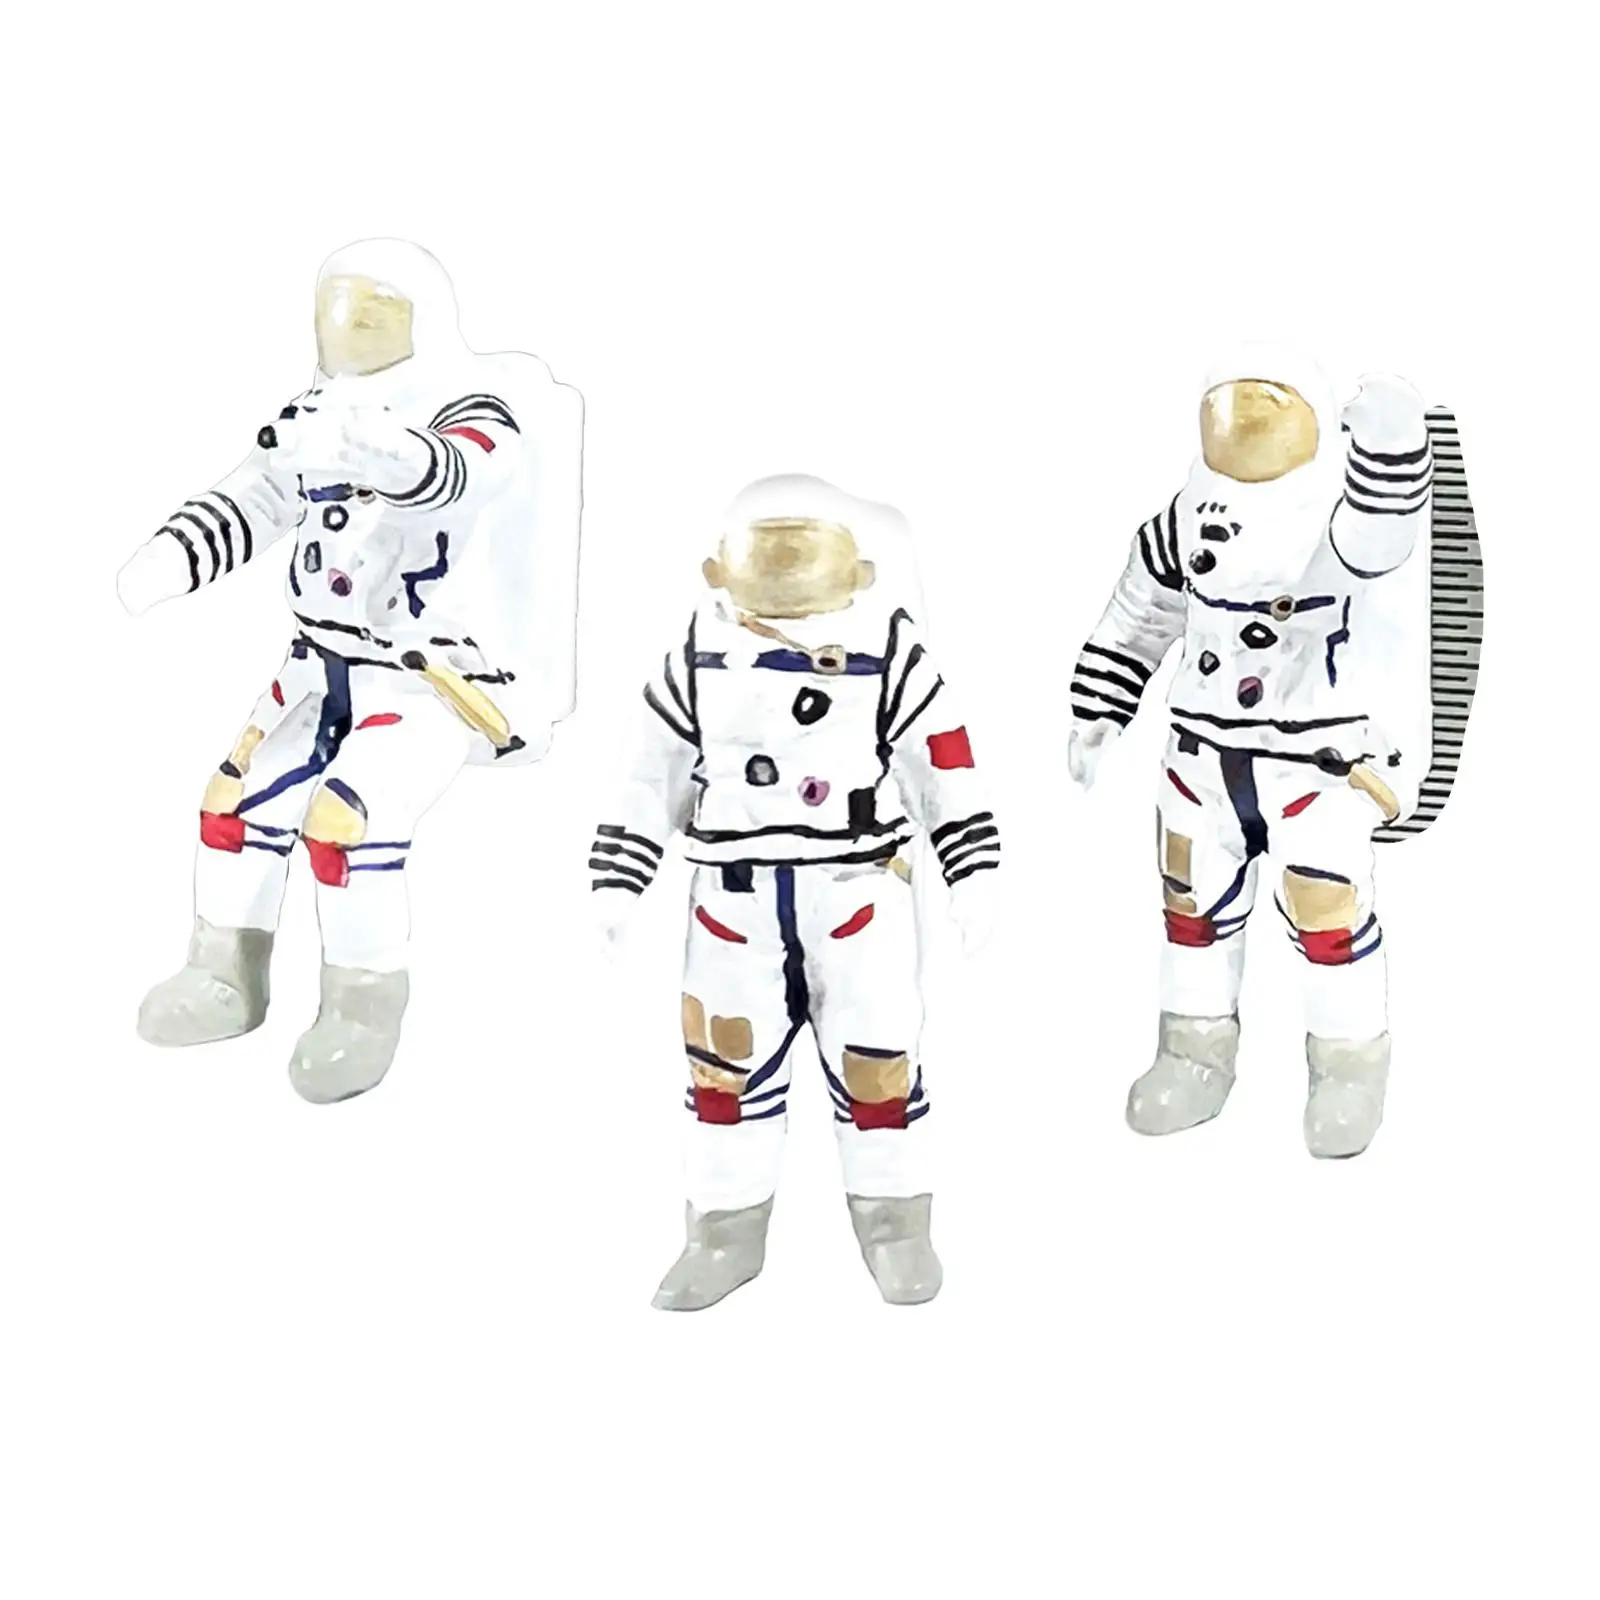 1/64 Astronaut Figurines Resin Collection Cake Topper Mini Astronaut Toys for Dollhouse Micro Landscapes Photography Props Decor